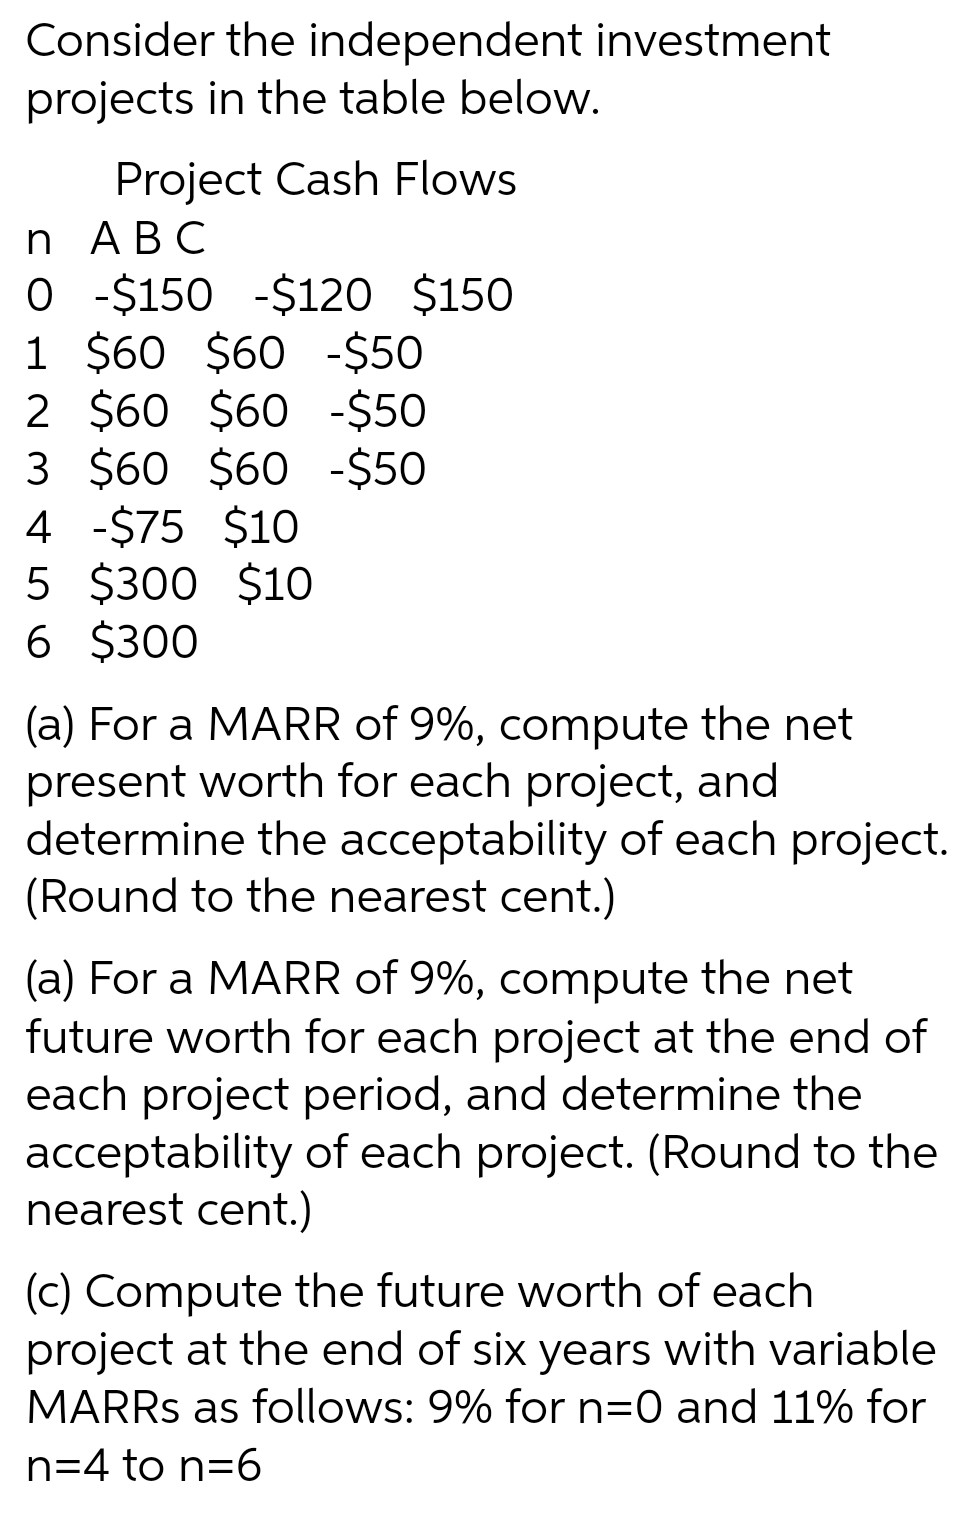 Consider the independent investment
projects in the table below.
Project Cash Flows
n АВС
O -$150 -$120 $150
1 $60 $60 -$50
2 $60 $60 -$50
3 $60 $60 -$50
4 -$75 $10
5 $300 $10
6 $300
(a) For a MARR of 9%, compute the net
present worth for each project, and
determine the acceptability of each project.
(Round to the nearest cent.)
(a) For a MARR of 9%, compute the net
future worth for each project at the end of
each project period, and determine the
acceptability of each project. (Round to the
nearest cent.)
(c) Compute the future worth of each
project at the end of six years with variable
MARRS as follows: 9% for n=0 and 11% for
n=4 to n=6
